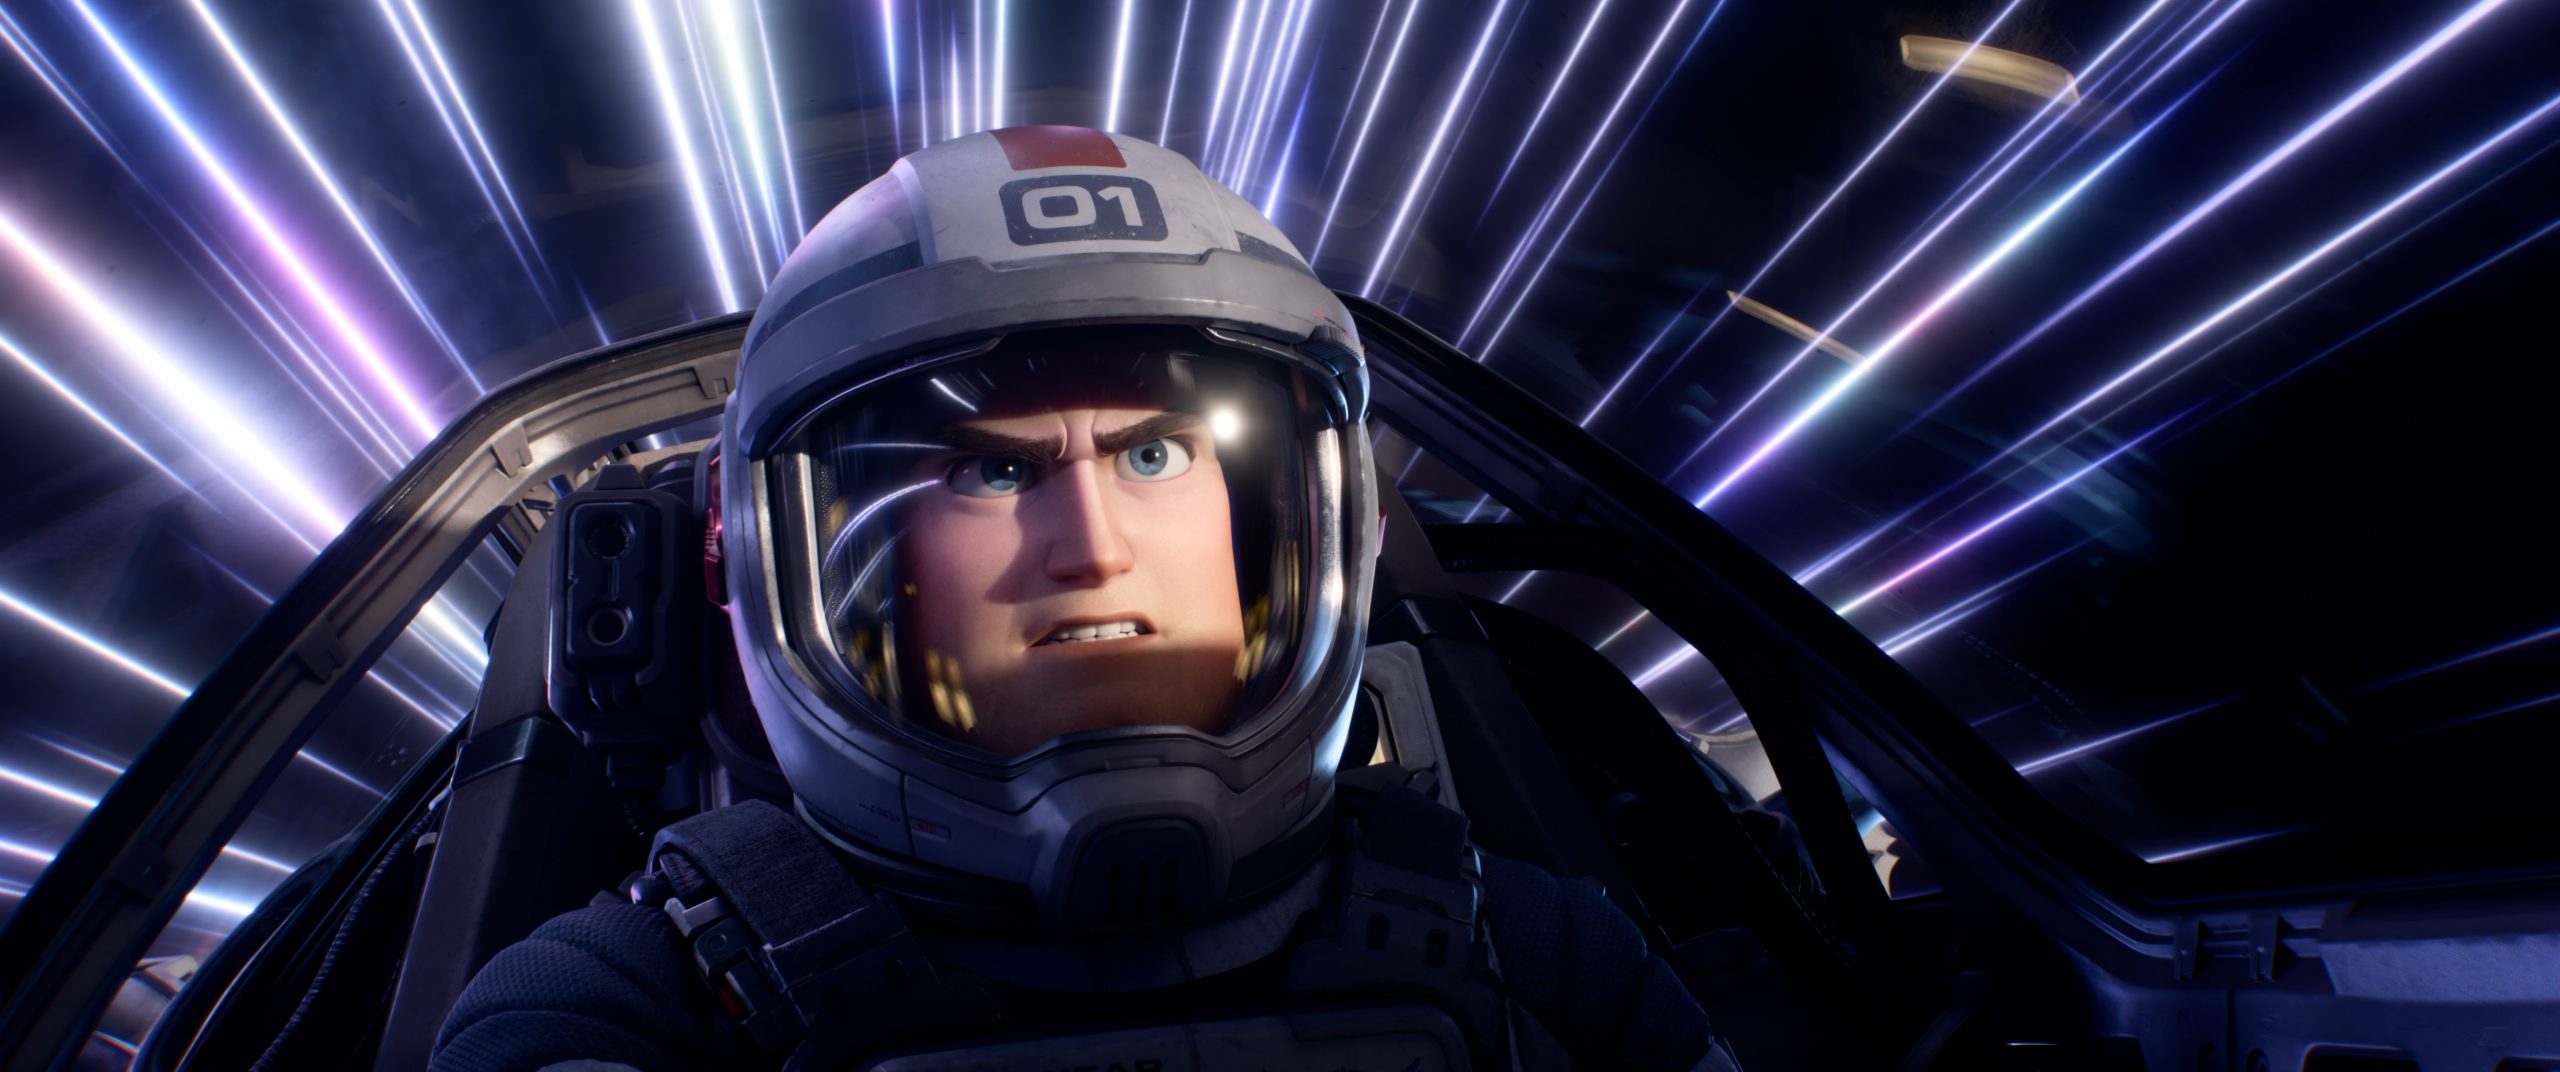 AND BEYOND -- Disney and Pixar’s “Lightyear” is an all-new, original feature film that presen...